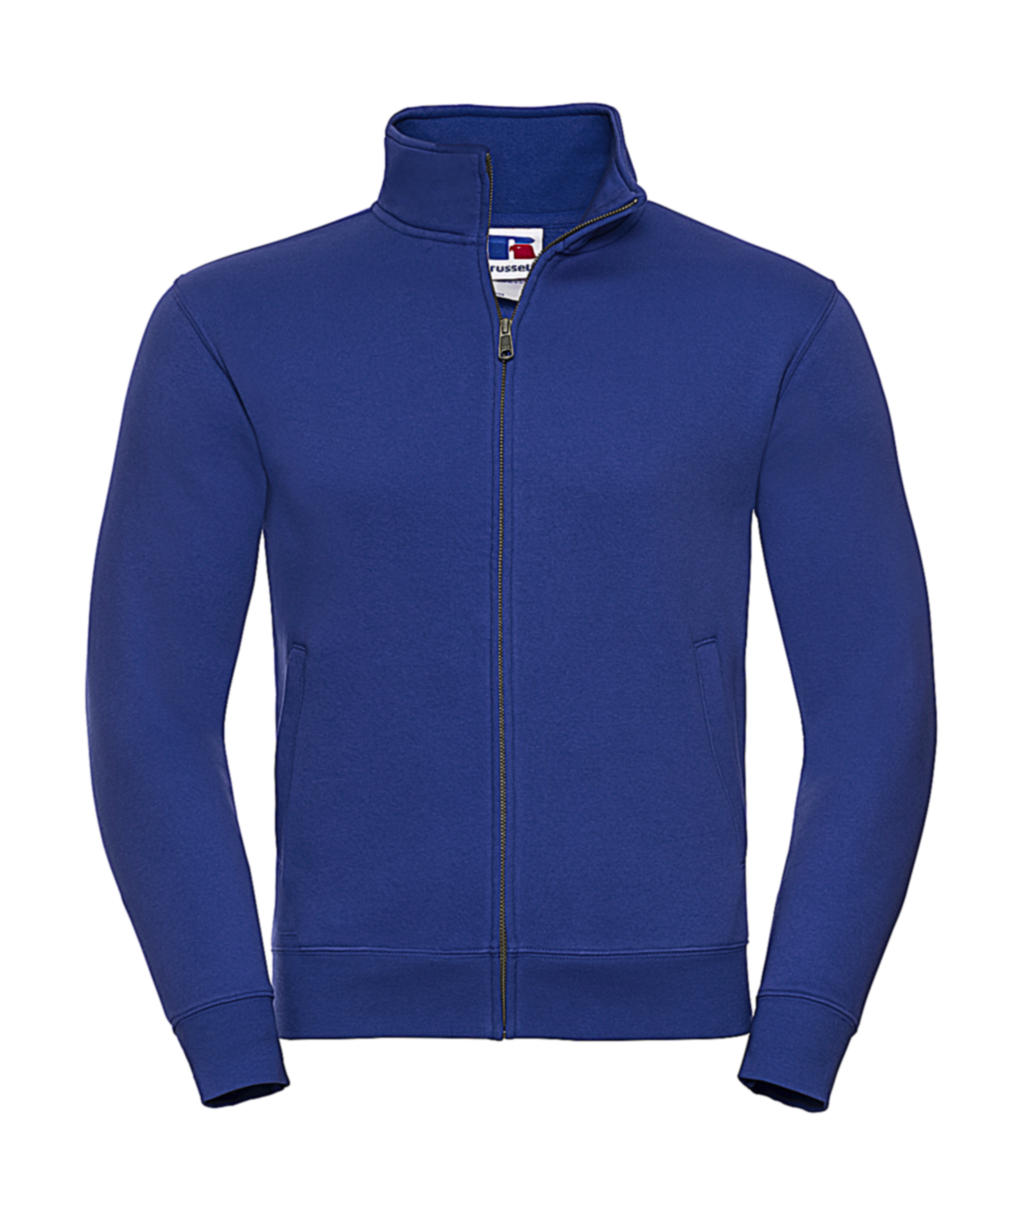  Mens Authentic Sweat Jacket in Farbe Bright Royal